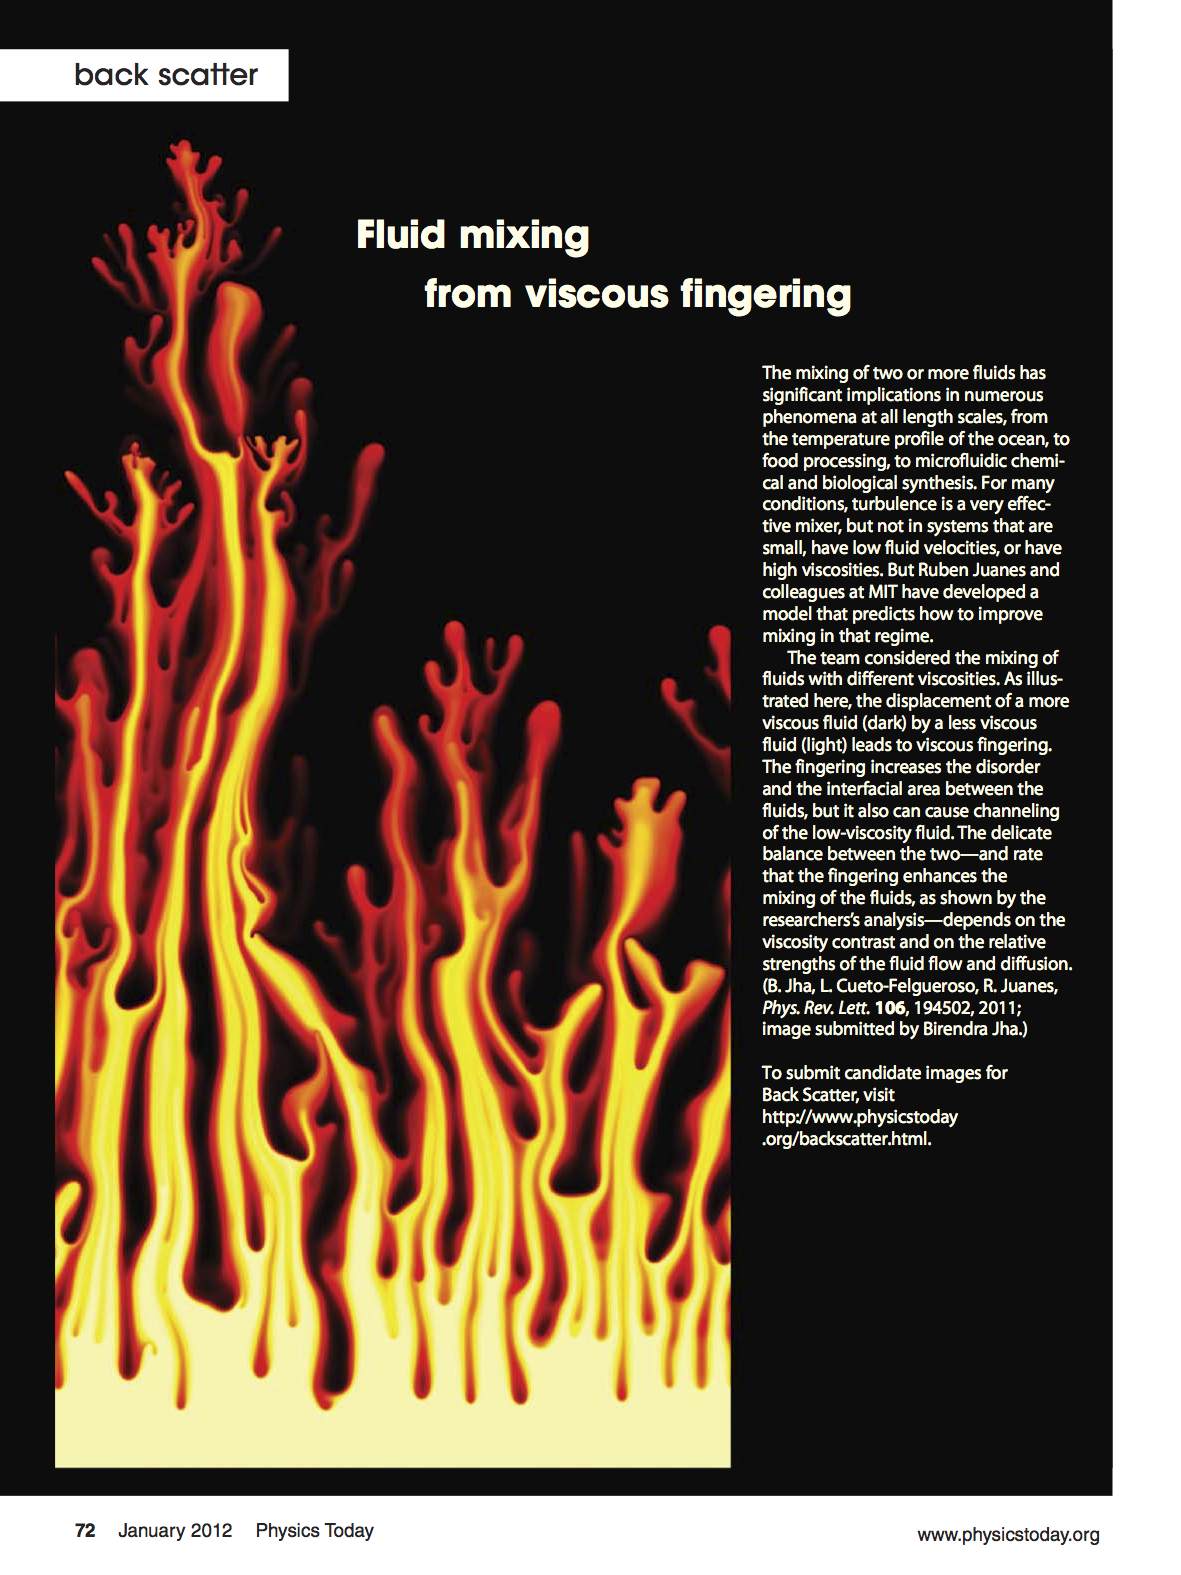 Fluid mixing from viscous fingering